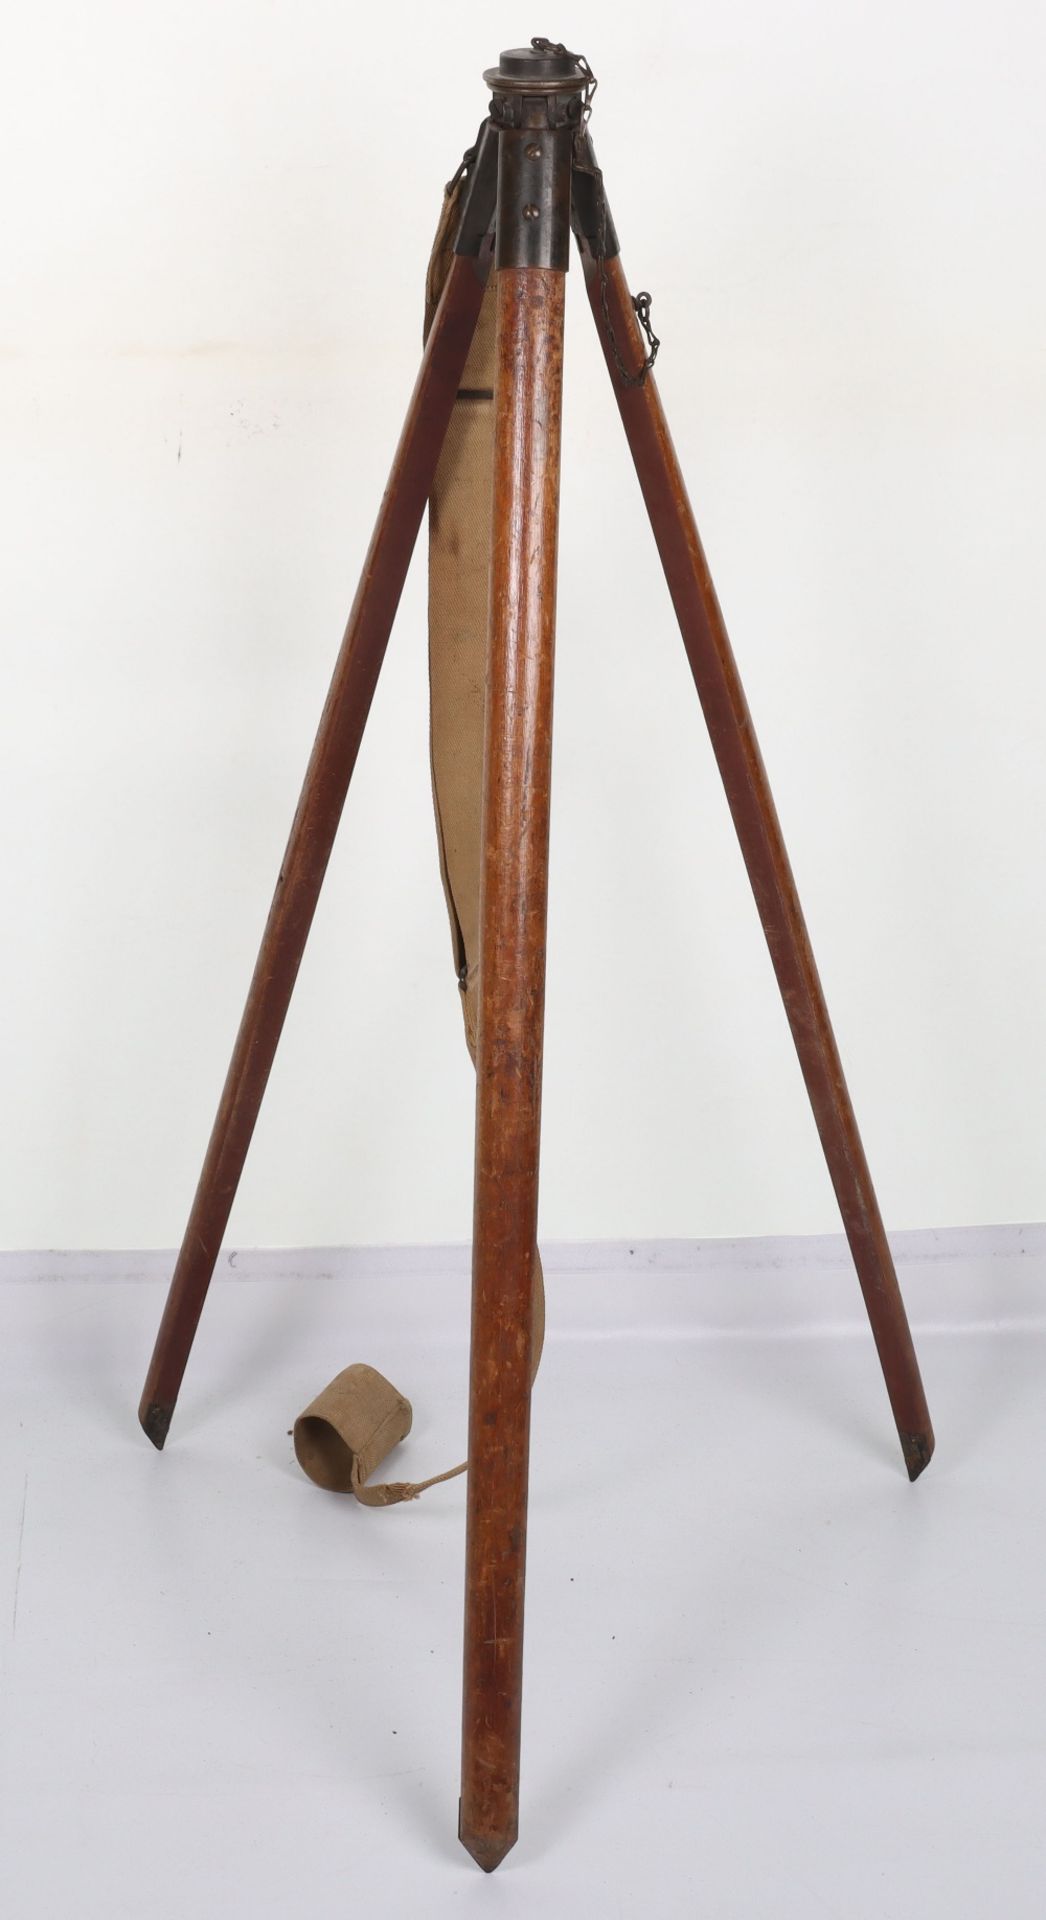 Wooden Tripod Stand for Signalling Lamp or Heliograph - Image 2 of 5